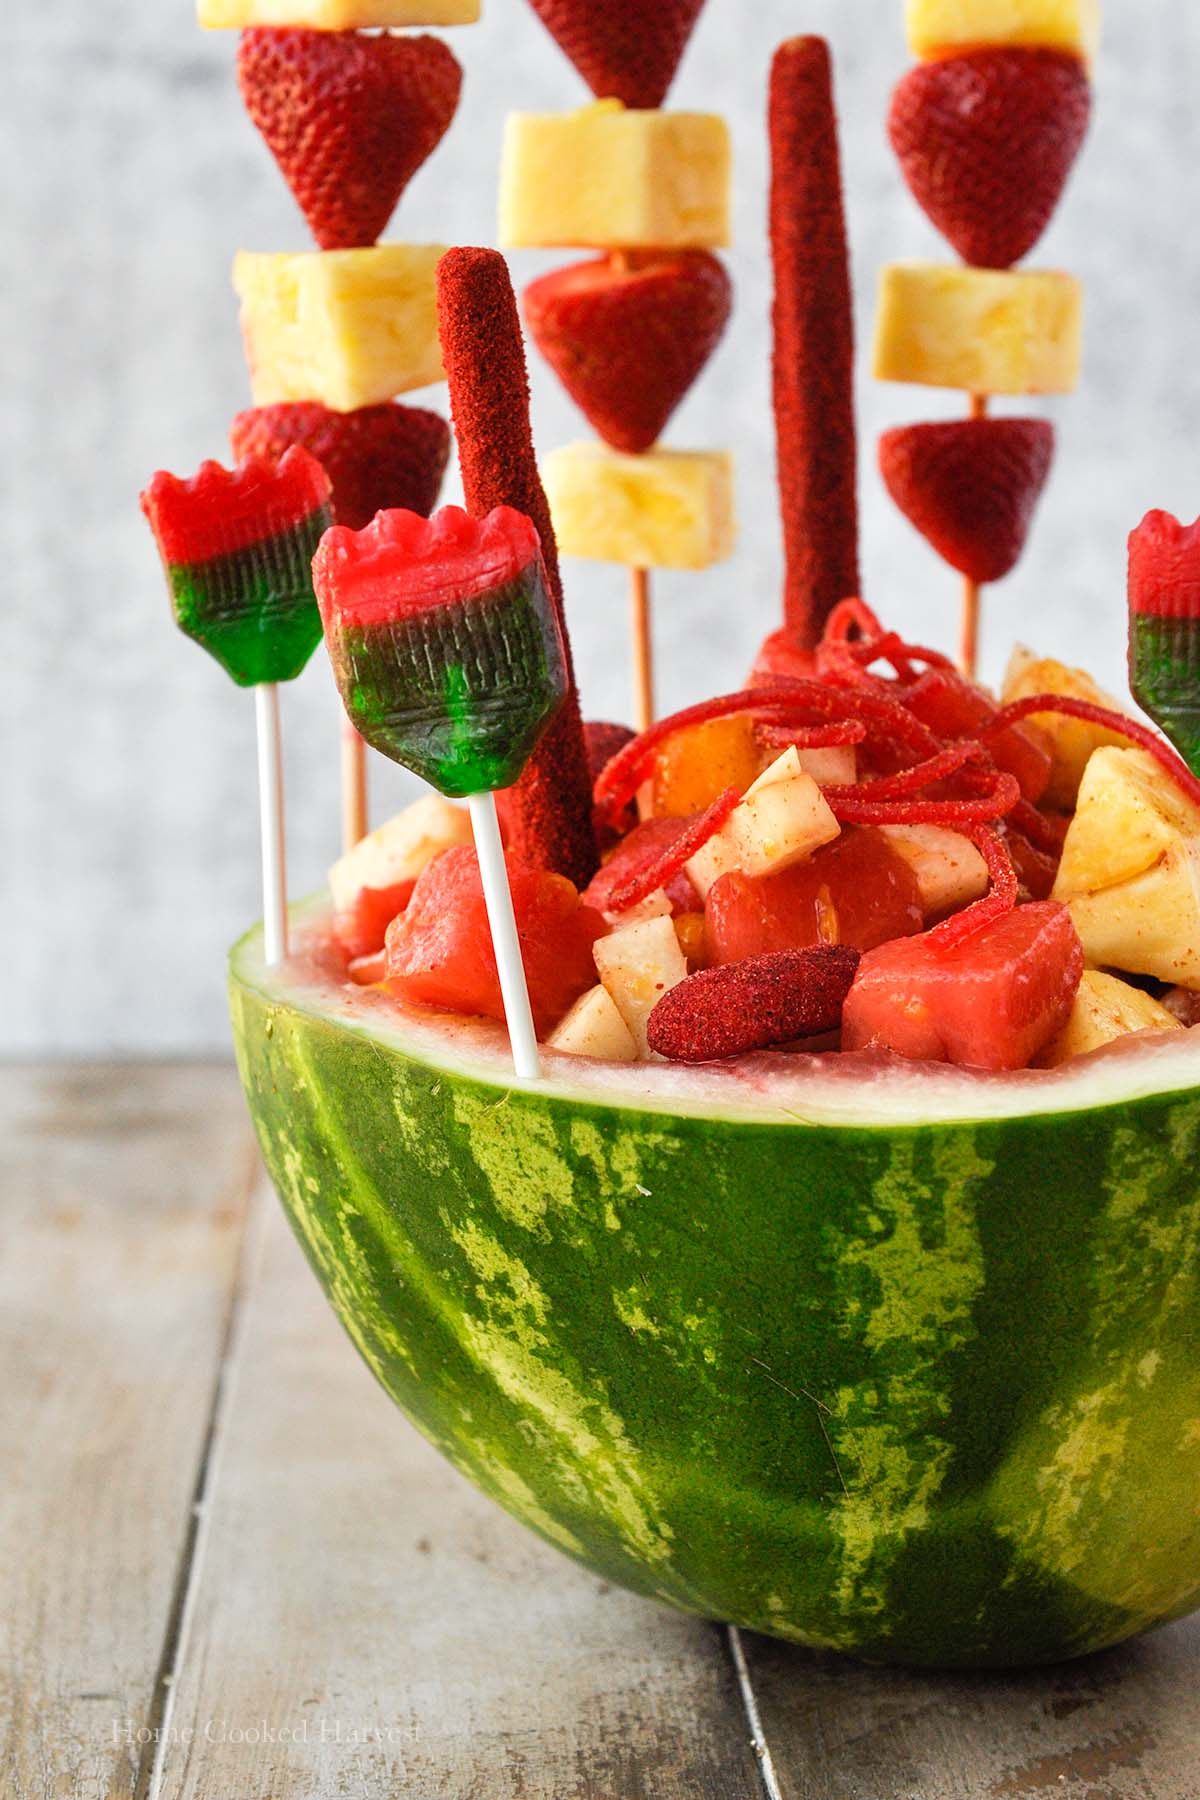 A watermelon bowl stuffed with chamoy and tajin coated fruits. Lollipops and fruit skewers are stuck into the watermelon rind.